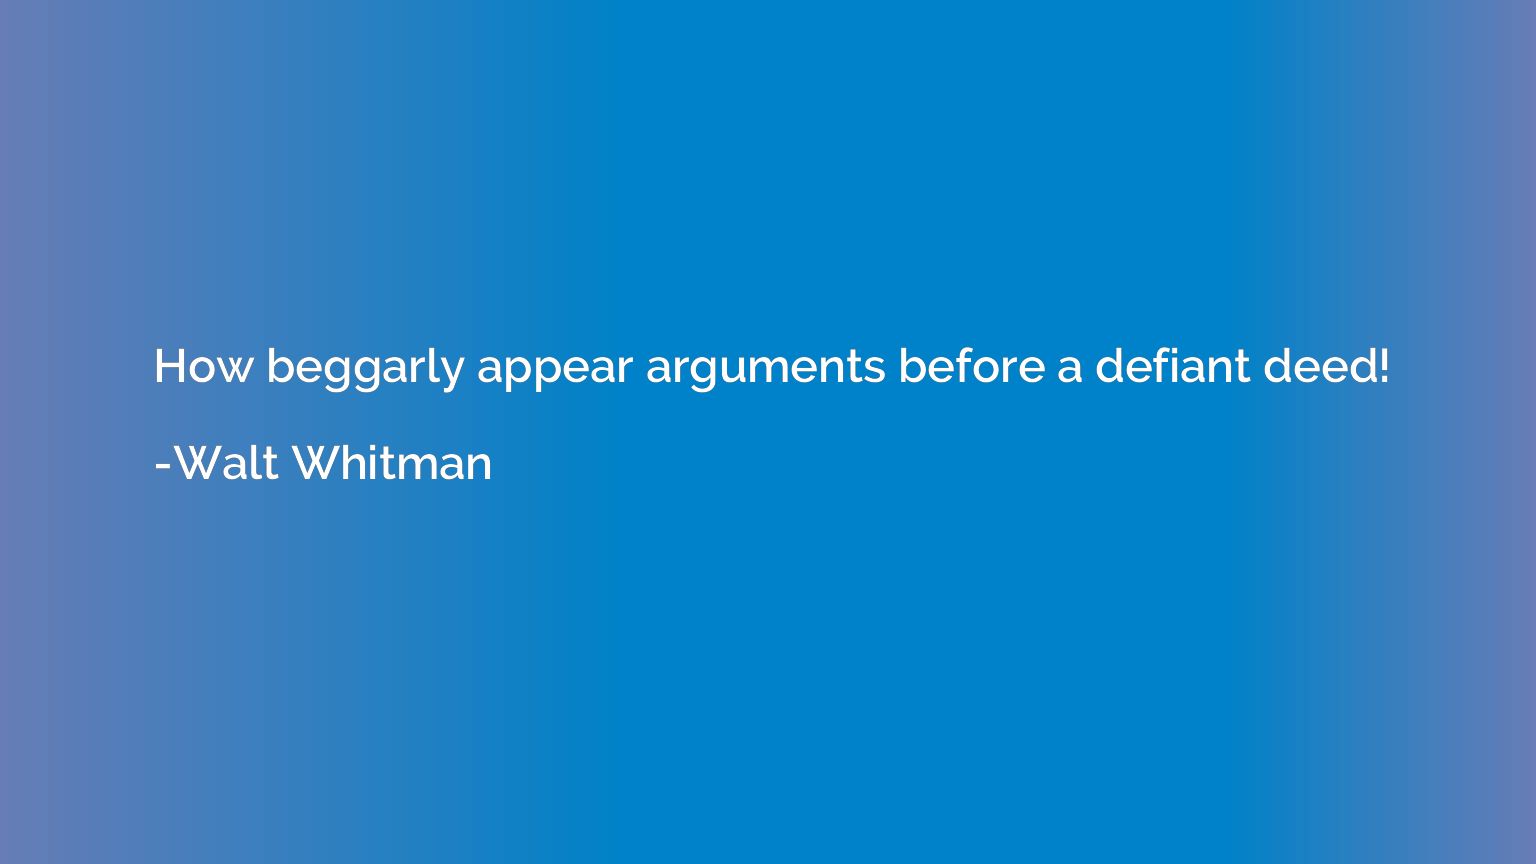 How beggarly appear arguments before a defiant deed!